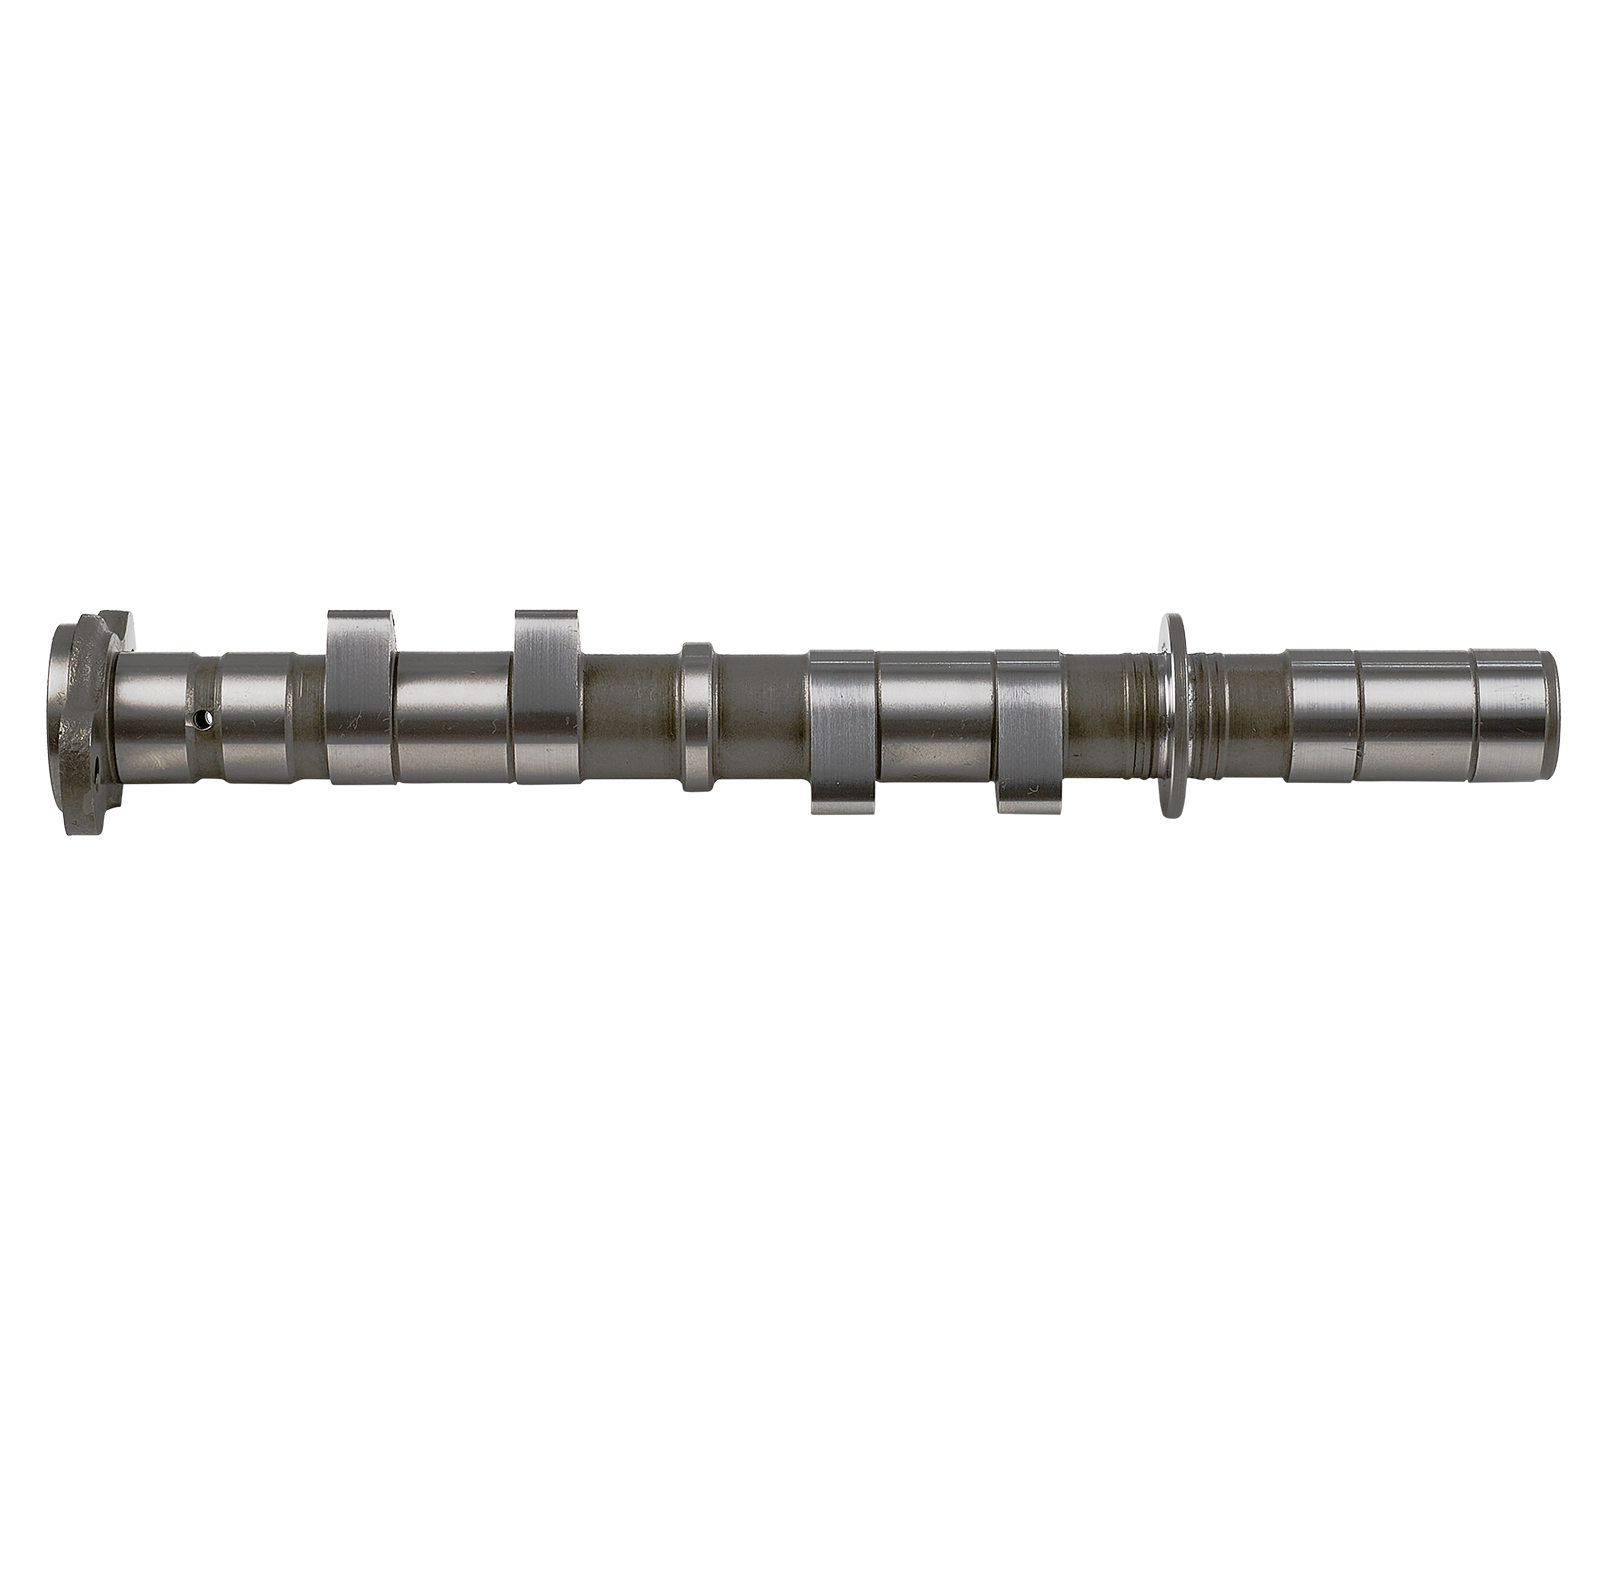 Camshaft Assembly for Yamaha 1Yw-12170-00-00 